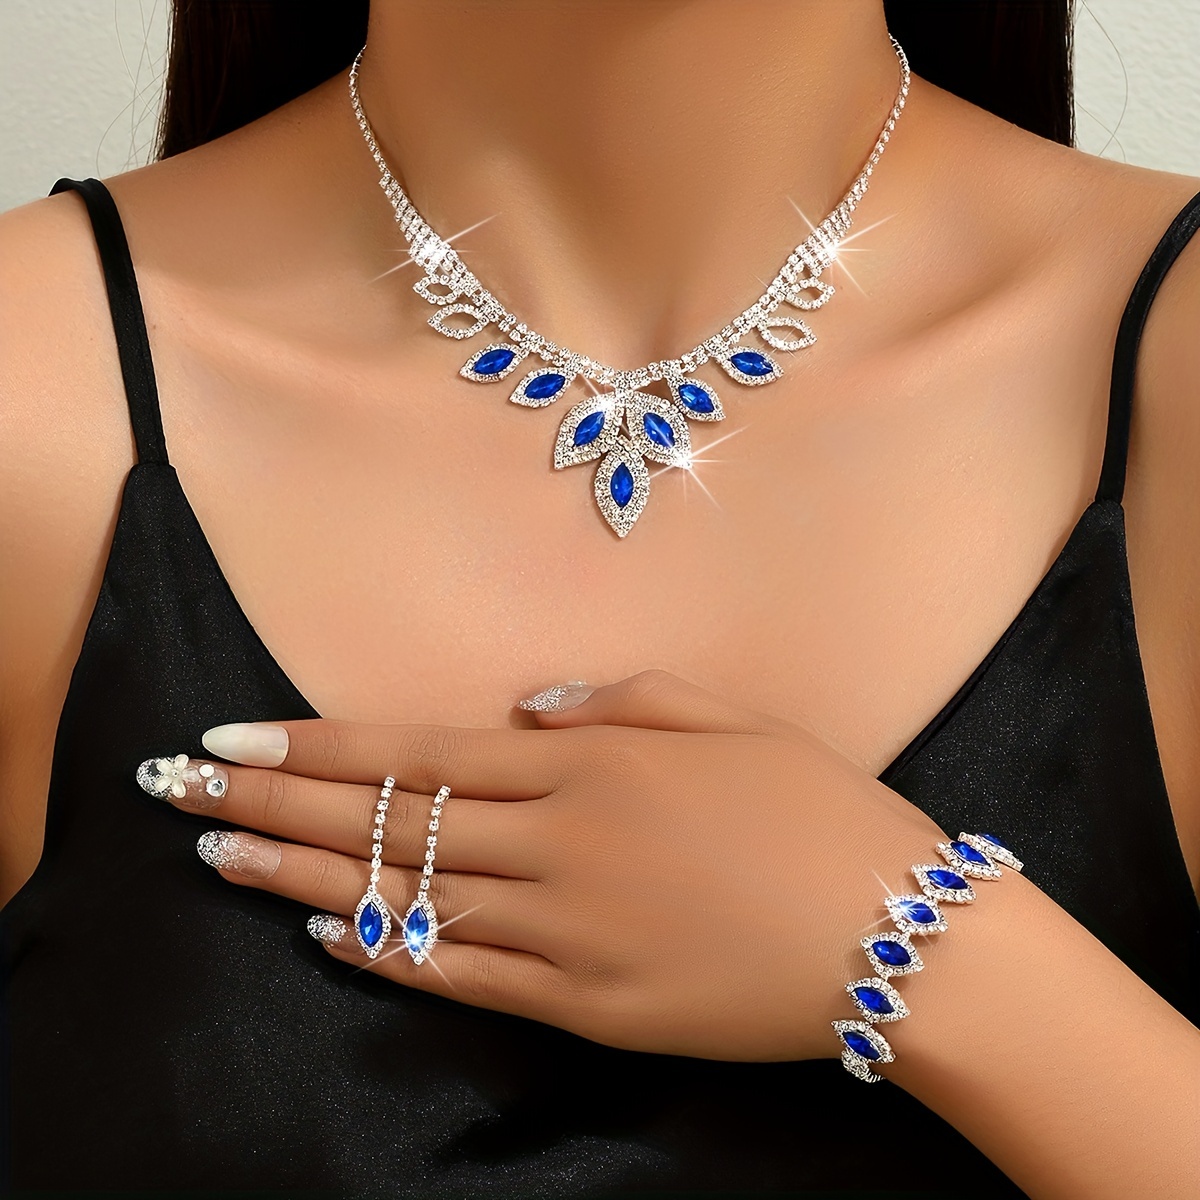 All Fashion Jewelry Collection for Women